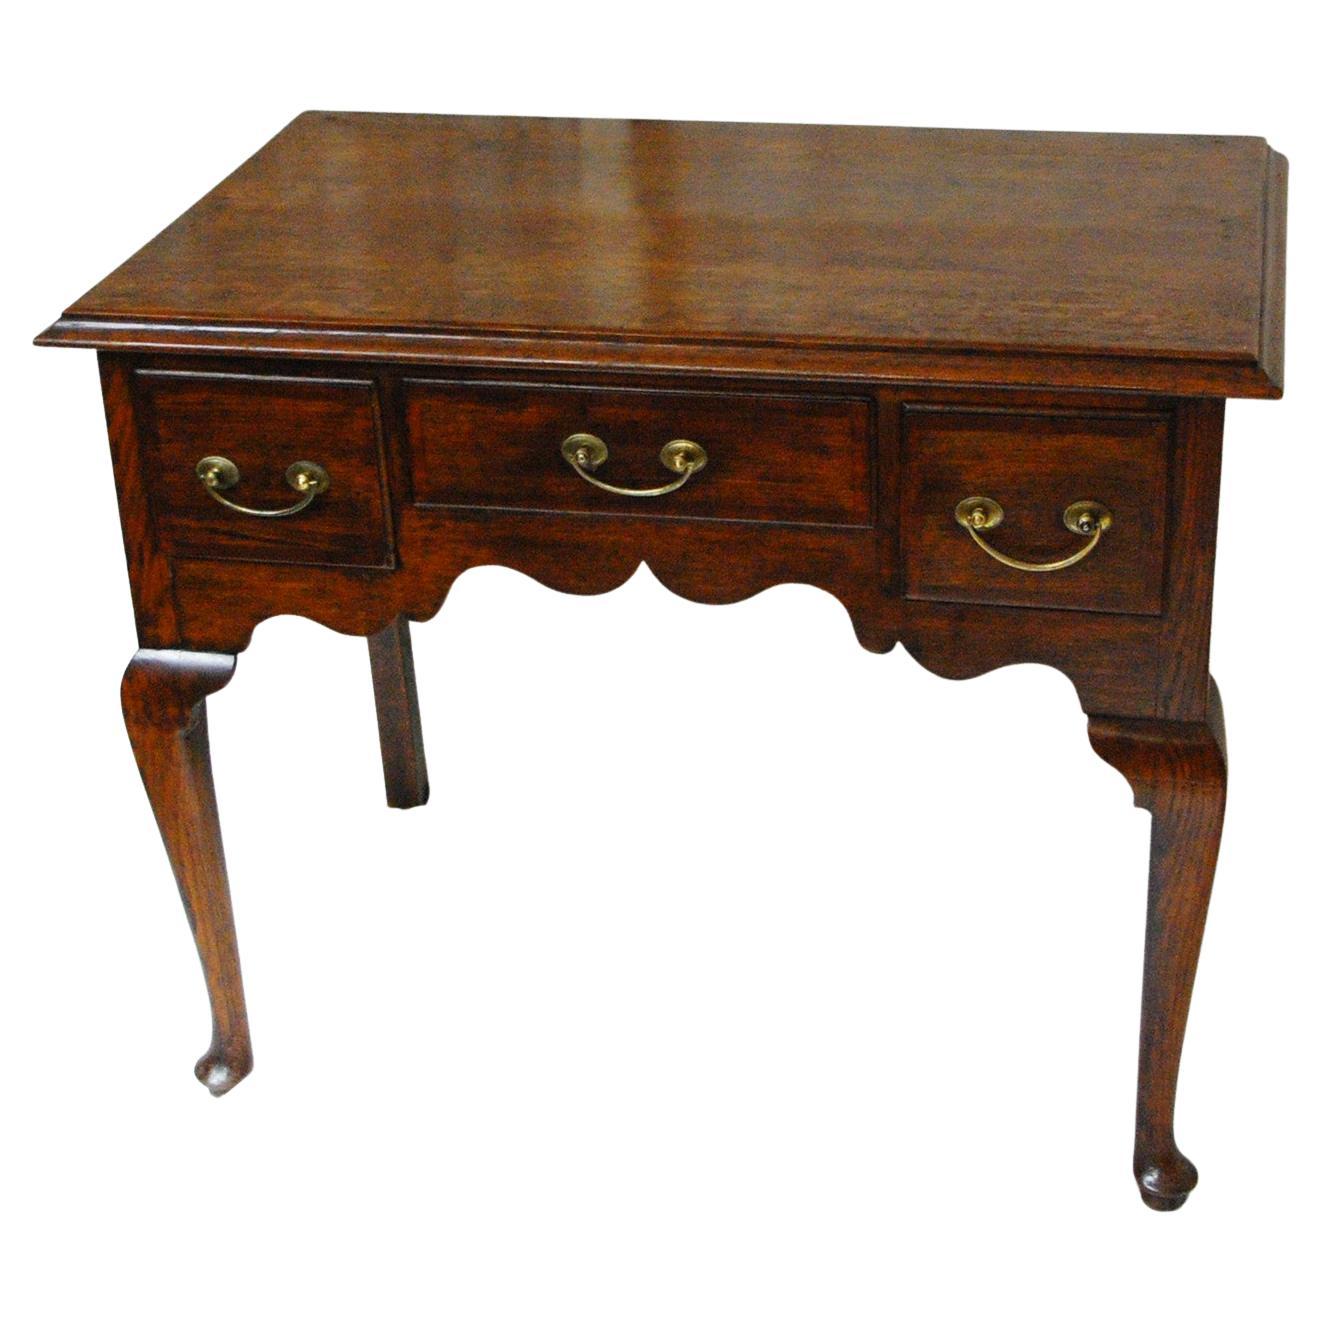 English Georgian Oak Lowboy with Cabriole Legs and Crossbanded Drawer Fronts